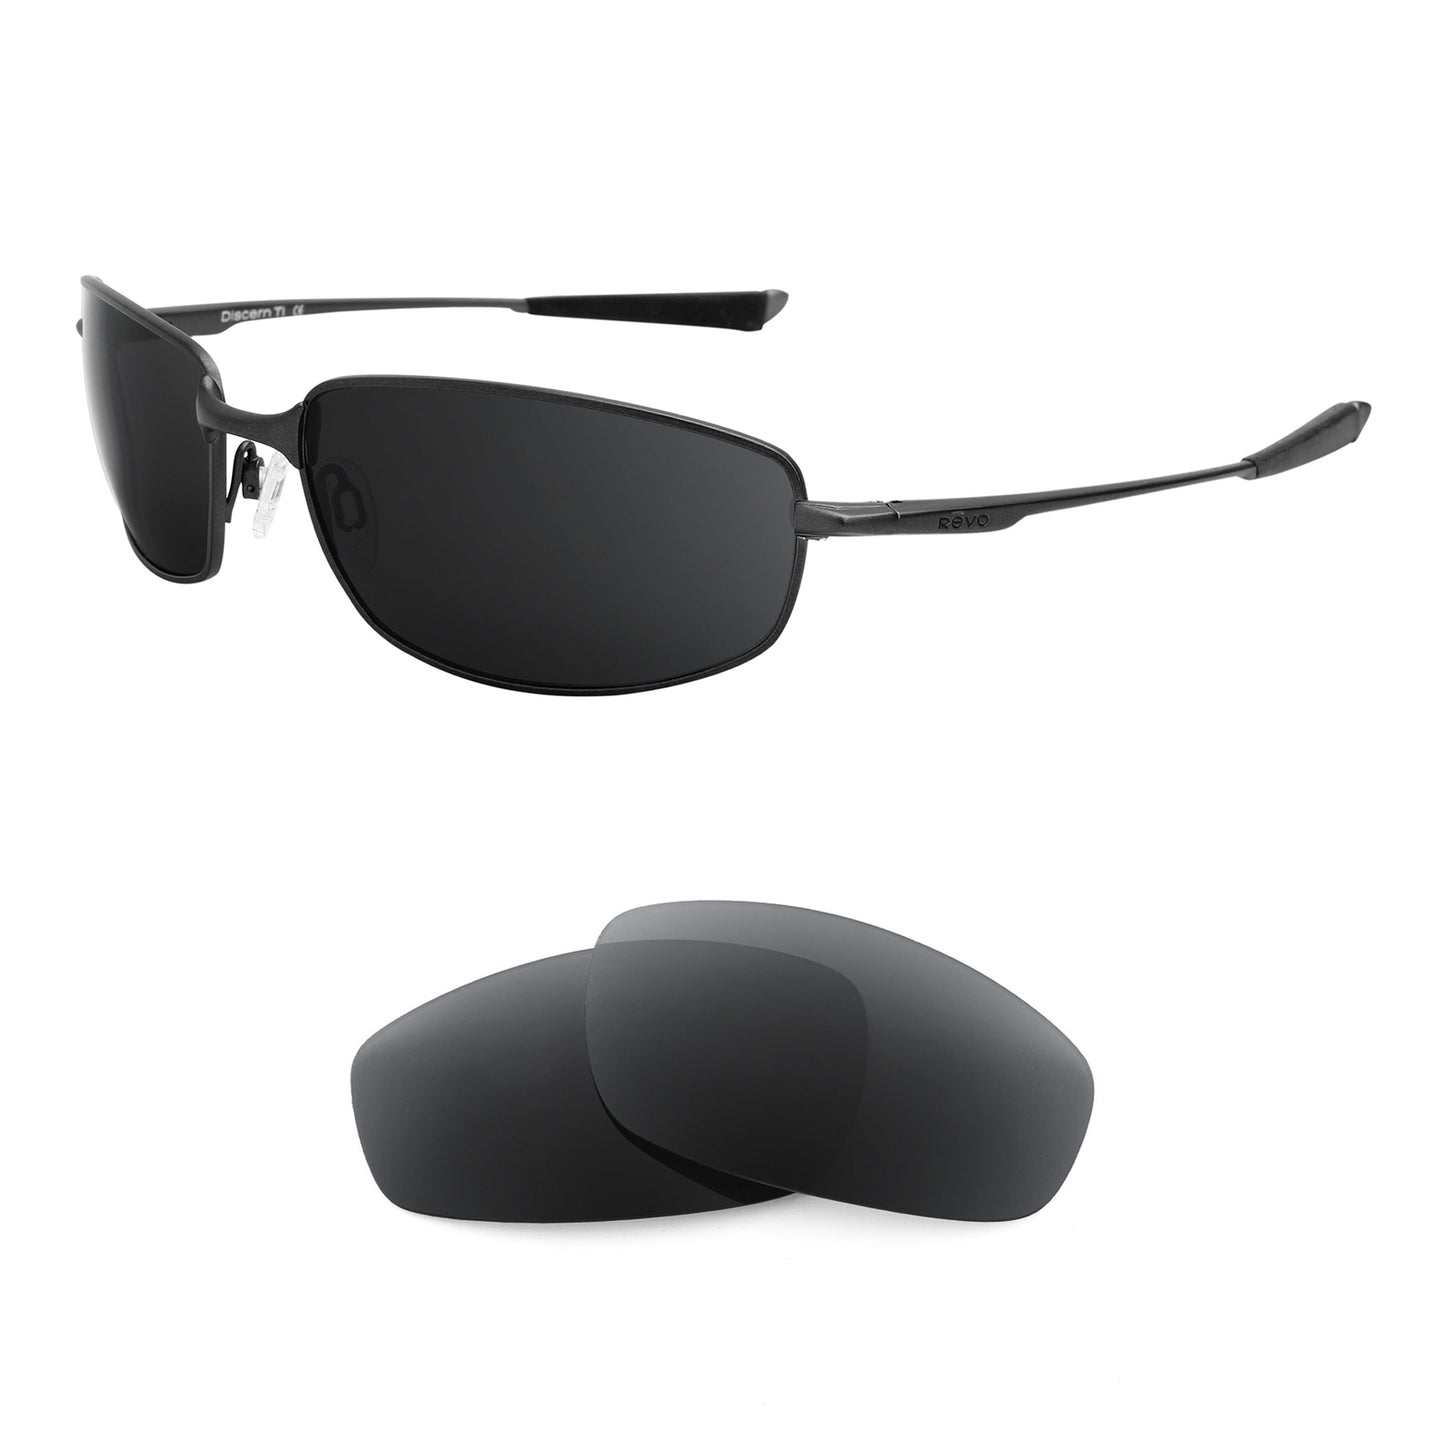 Revo Discern RE3084 sunglasses with replacement lenses